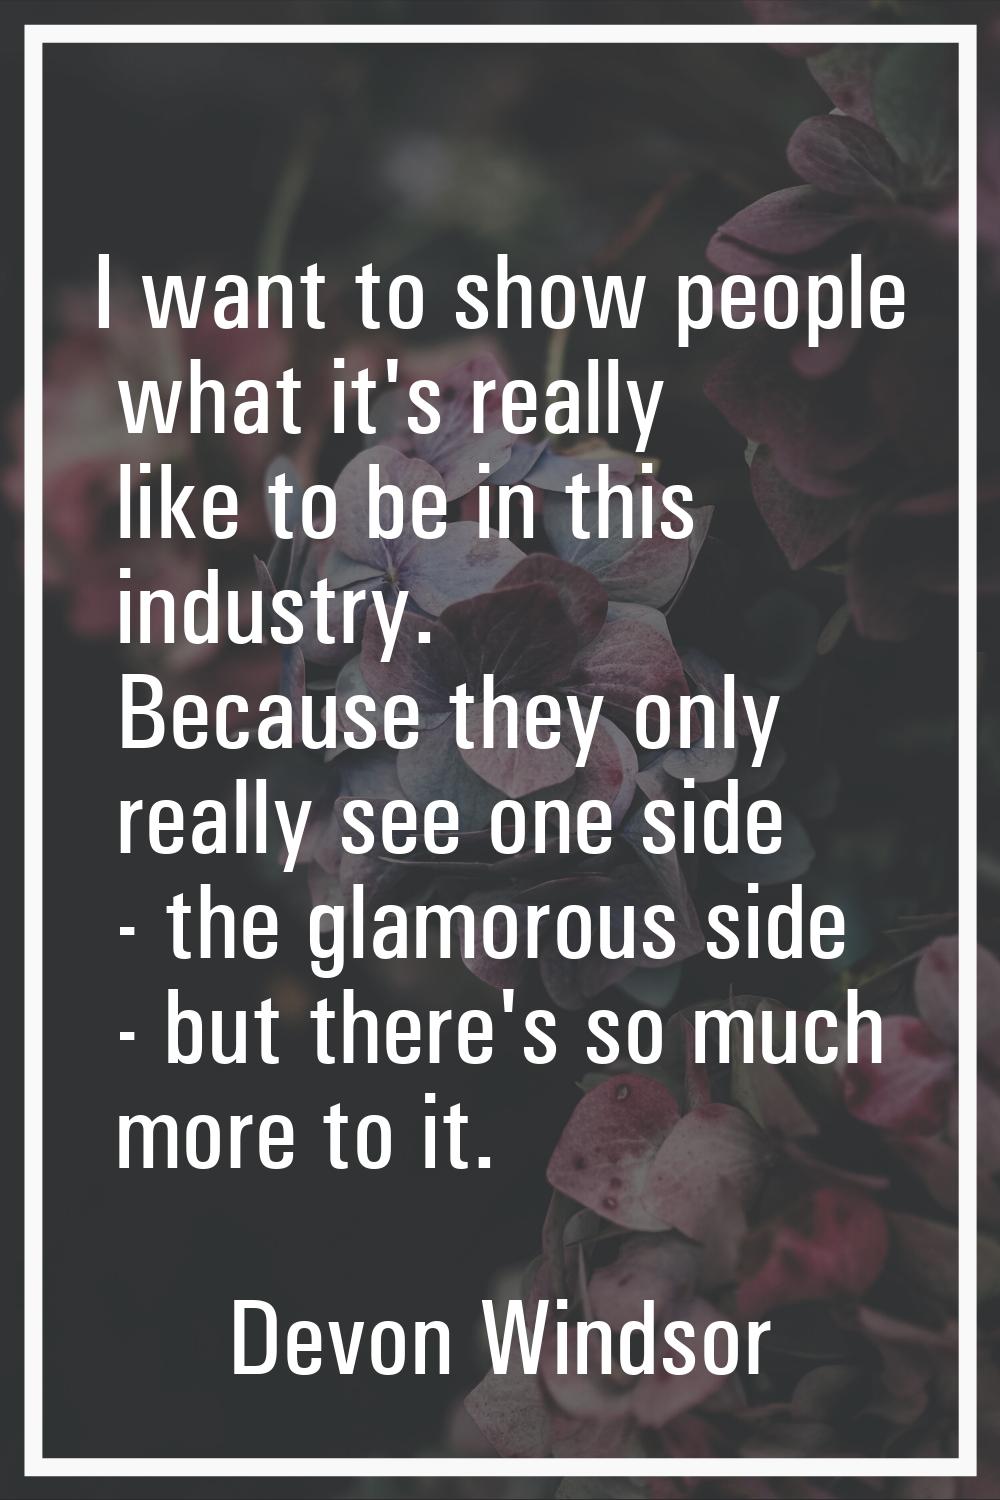 I want to show people what it's really like to be in this industry. Because they only really see on